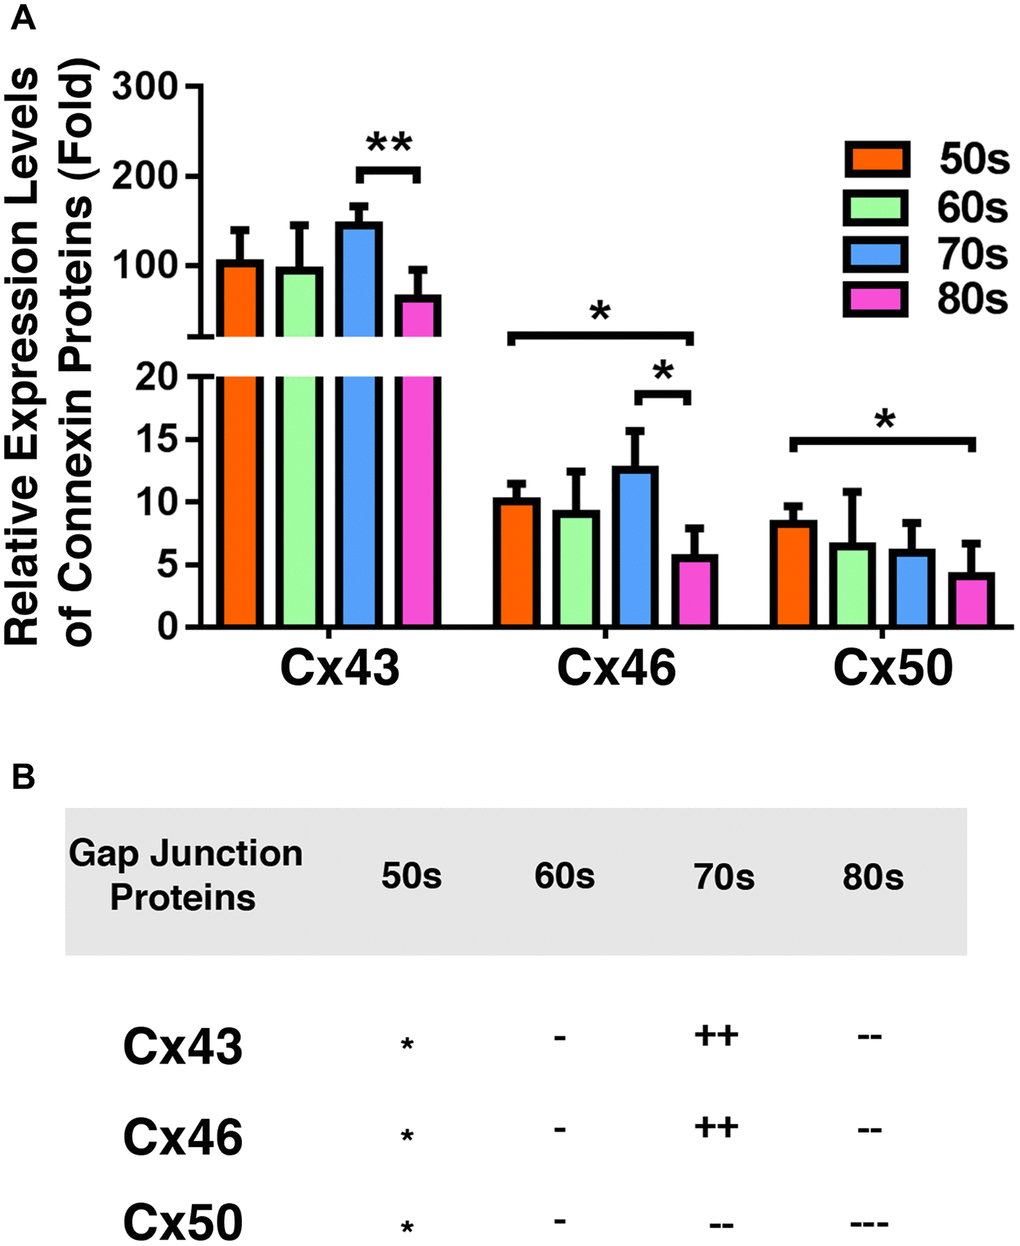 Comparison of the connexins Cx43, Cx46 and Cx50 levels in the epithelia of human cataractous lenses of different age groups. (A) Relative expression levels of Cx43, Cx46 and Cx50 in the epithelia of human cataractous lenses of different age groups as indicated (50s, 60s,70s, 80s). Each bar represents an average of 12 samples for cataract lenses. (B) Summary of age-dependent changes of Cx43, Cx46 and Cx50 in cataract samples of different age groups. The levels of all samples from the patients of 50s age group are used as references indicated by star symbol ‘*’. +, ++, and +++ represent increases in protein levels between 0.1% and 24.99%, 25% and 50%, and >50%, respectively; −, −−, and −−− stands for decreases in protein levels between 0.1% and 24.99%, 25% and 50%, and >50%, respectively.